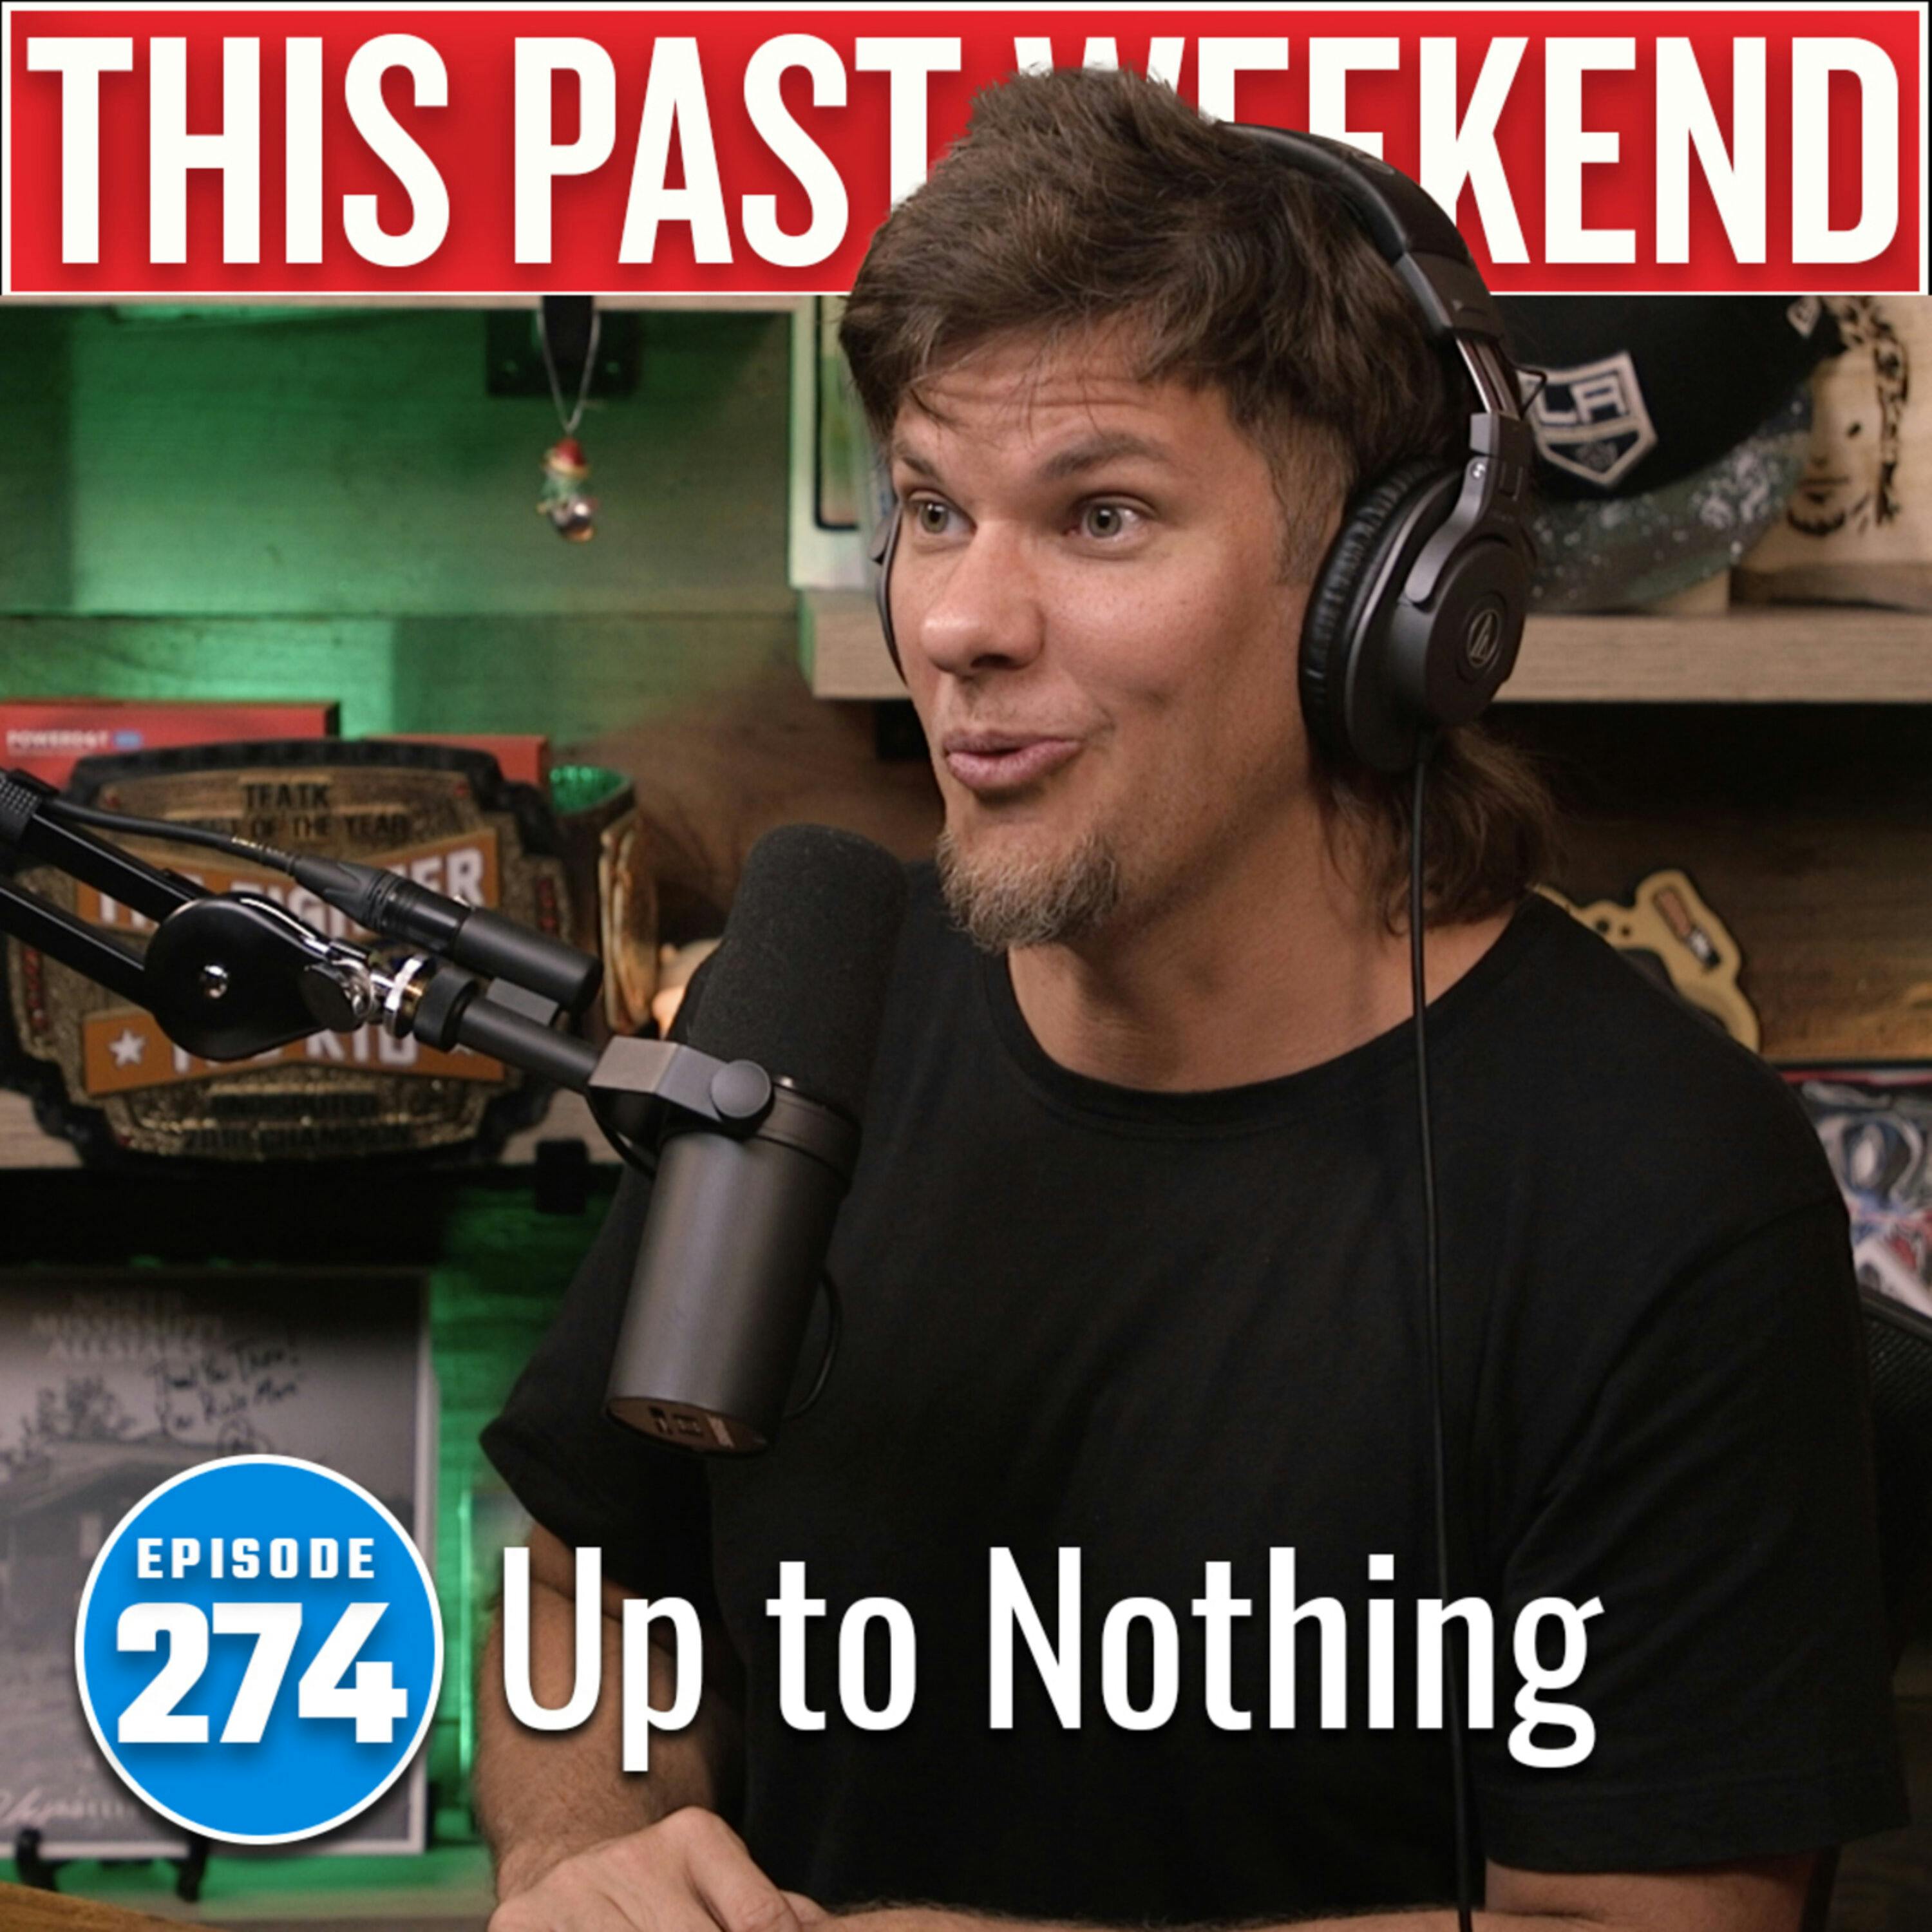 Up to Nothing | This Past Weekend #274 by Theo Von